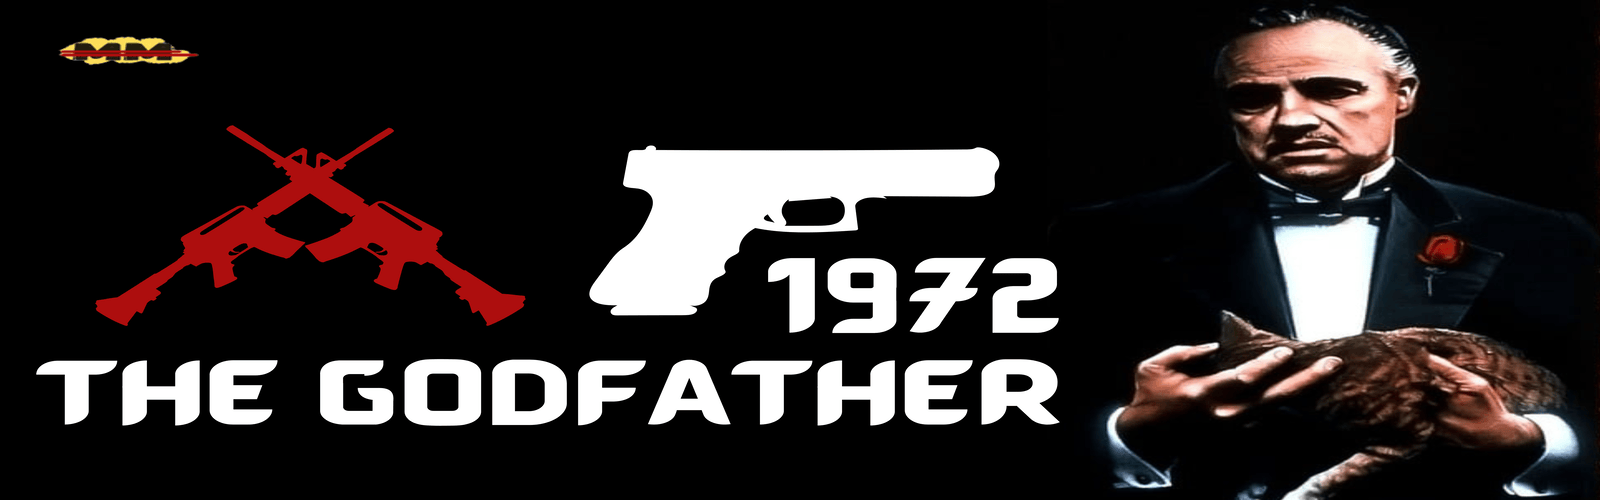 the godfather banner